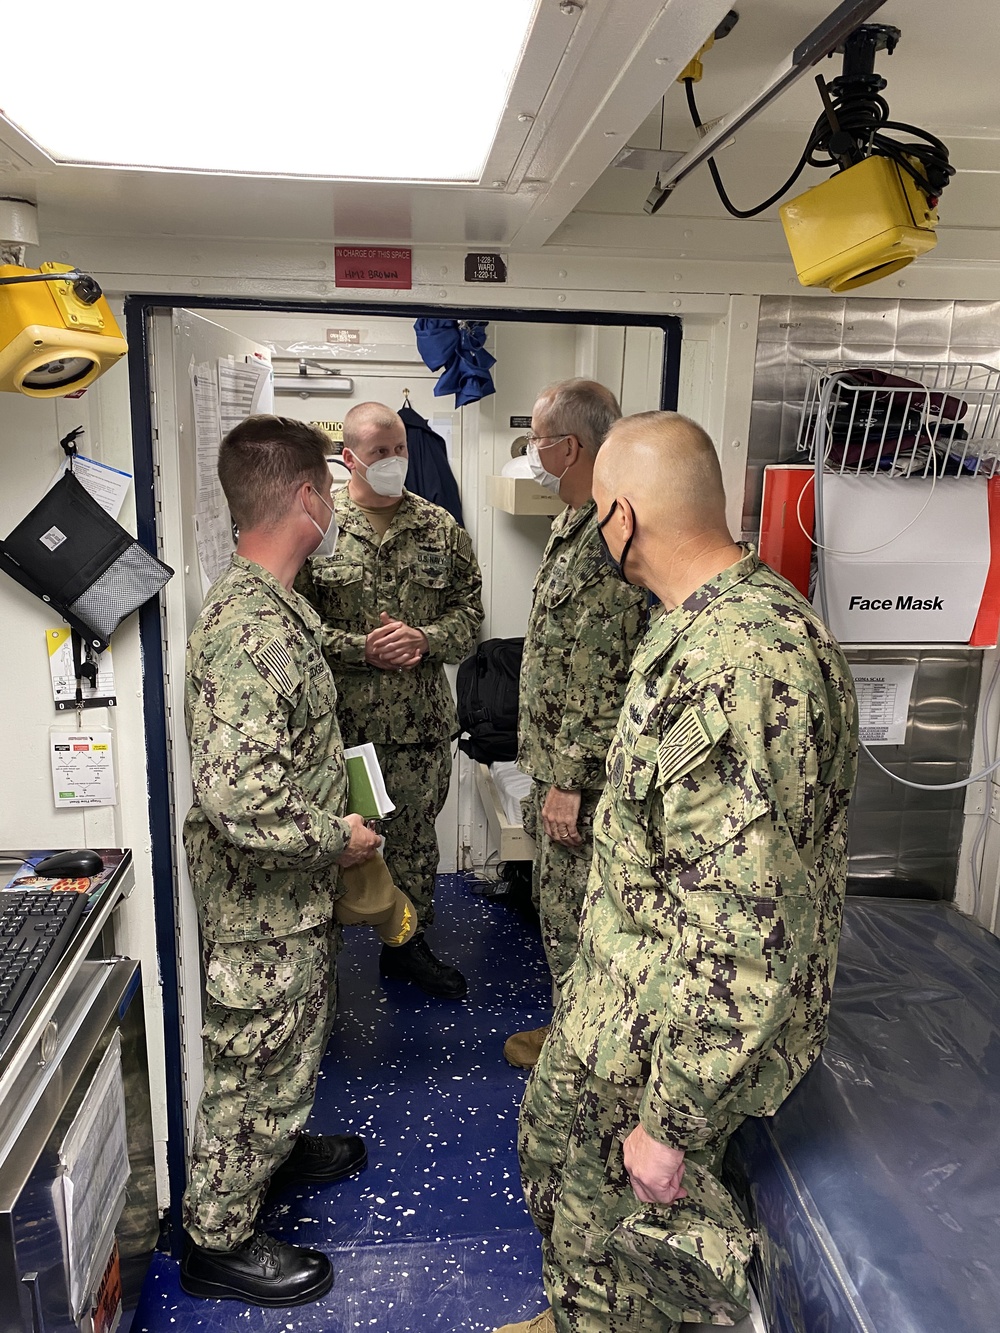 USS Cole Medical Spaces